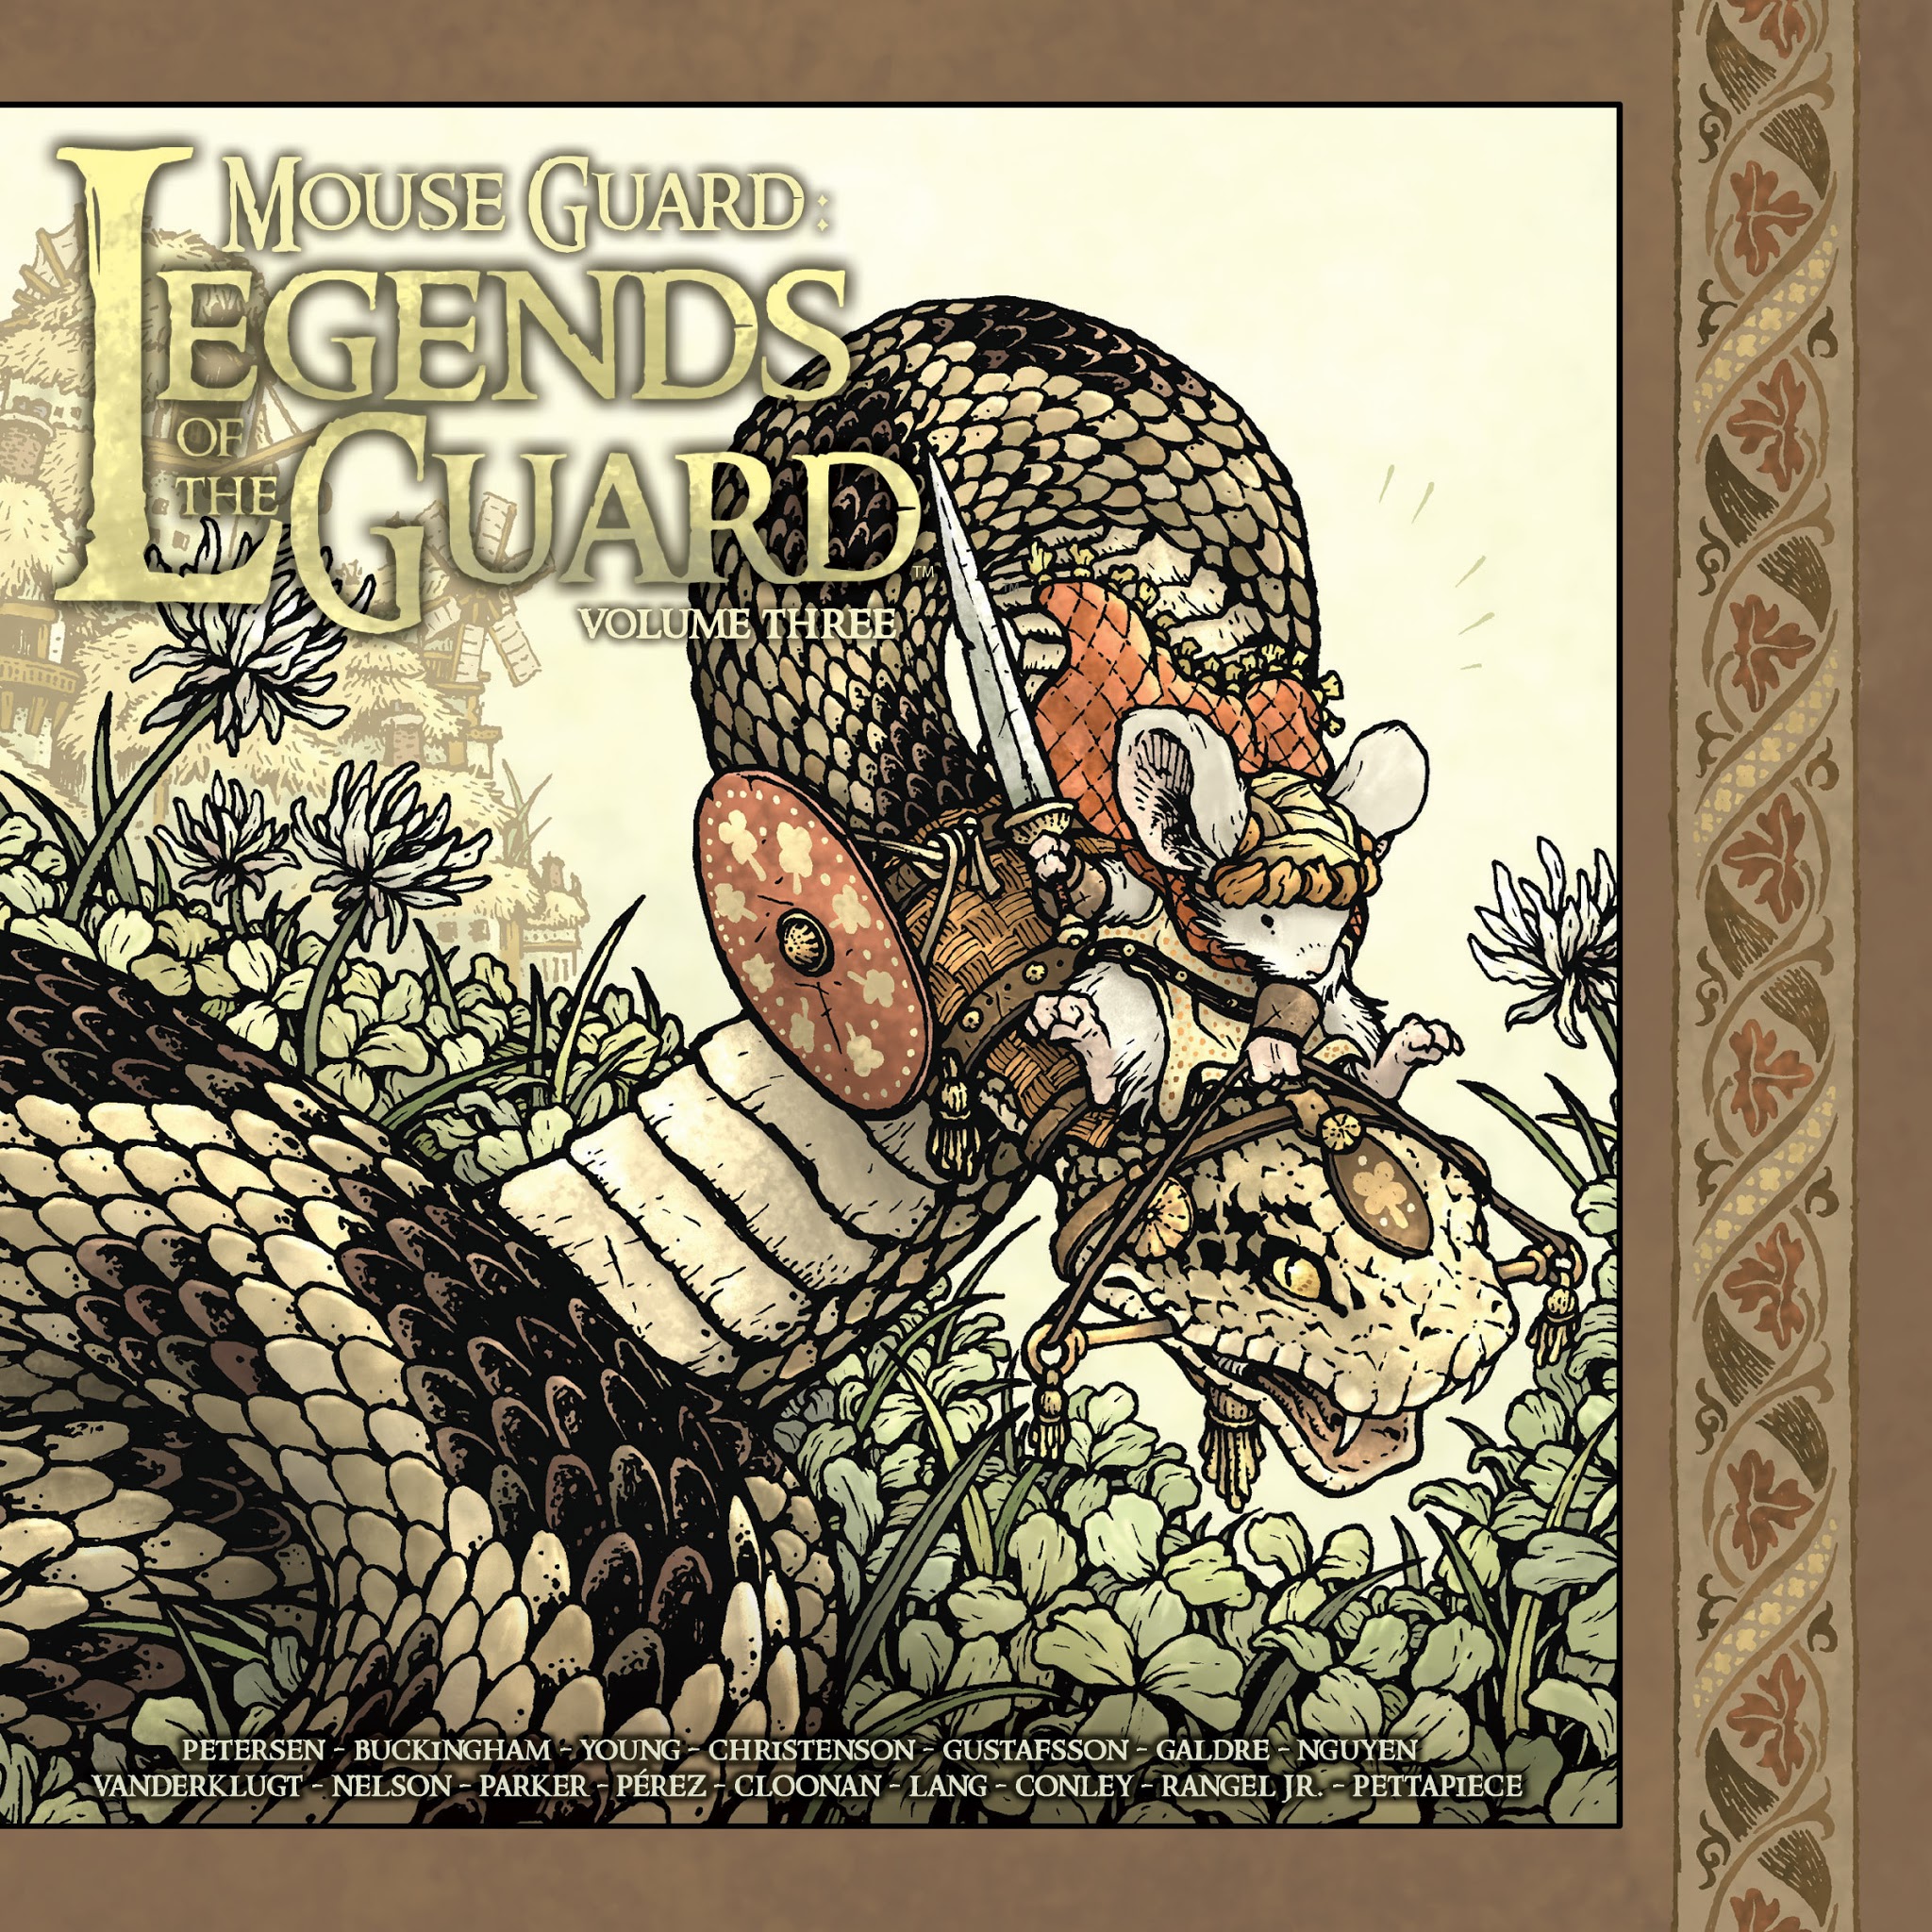 Read online Mouse Guard: Legends of the Guard Volume Three comic -  Issue # TPB - 1